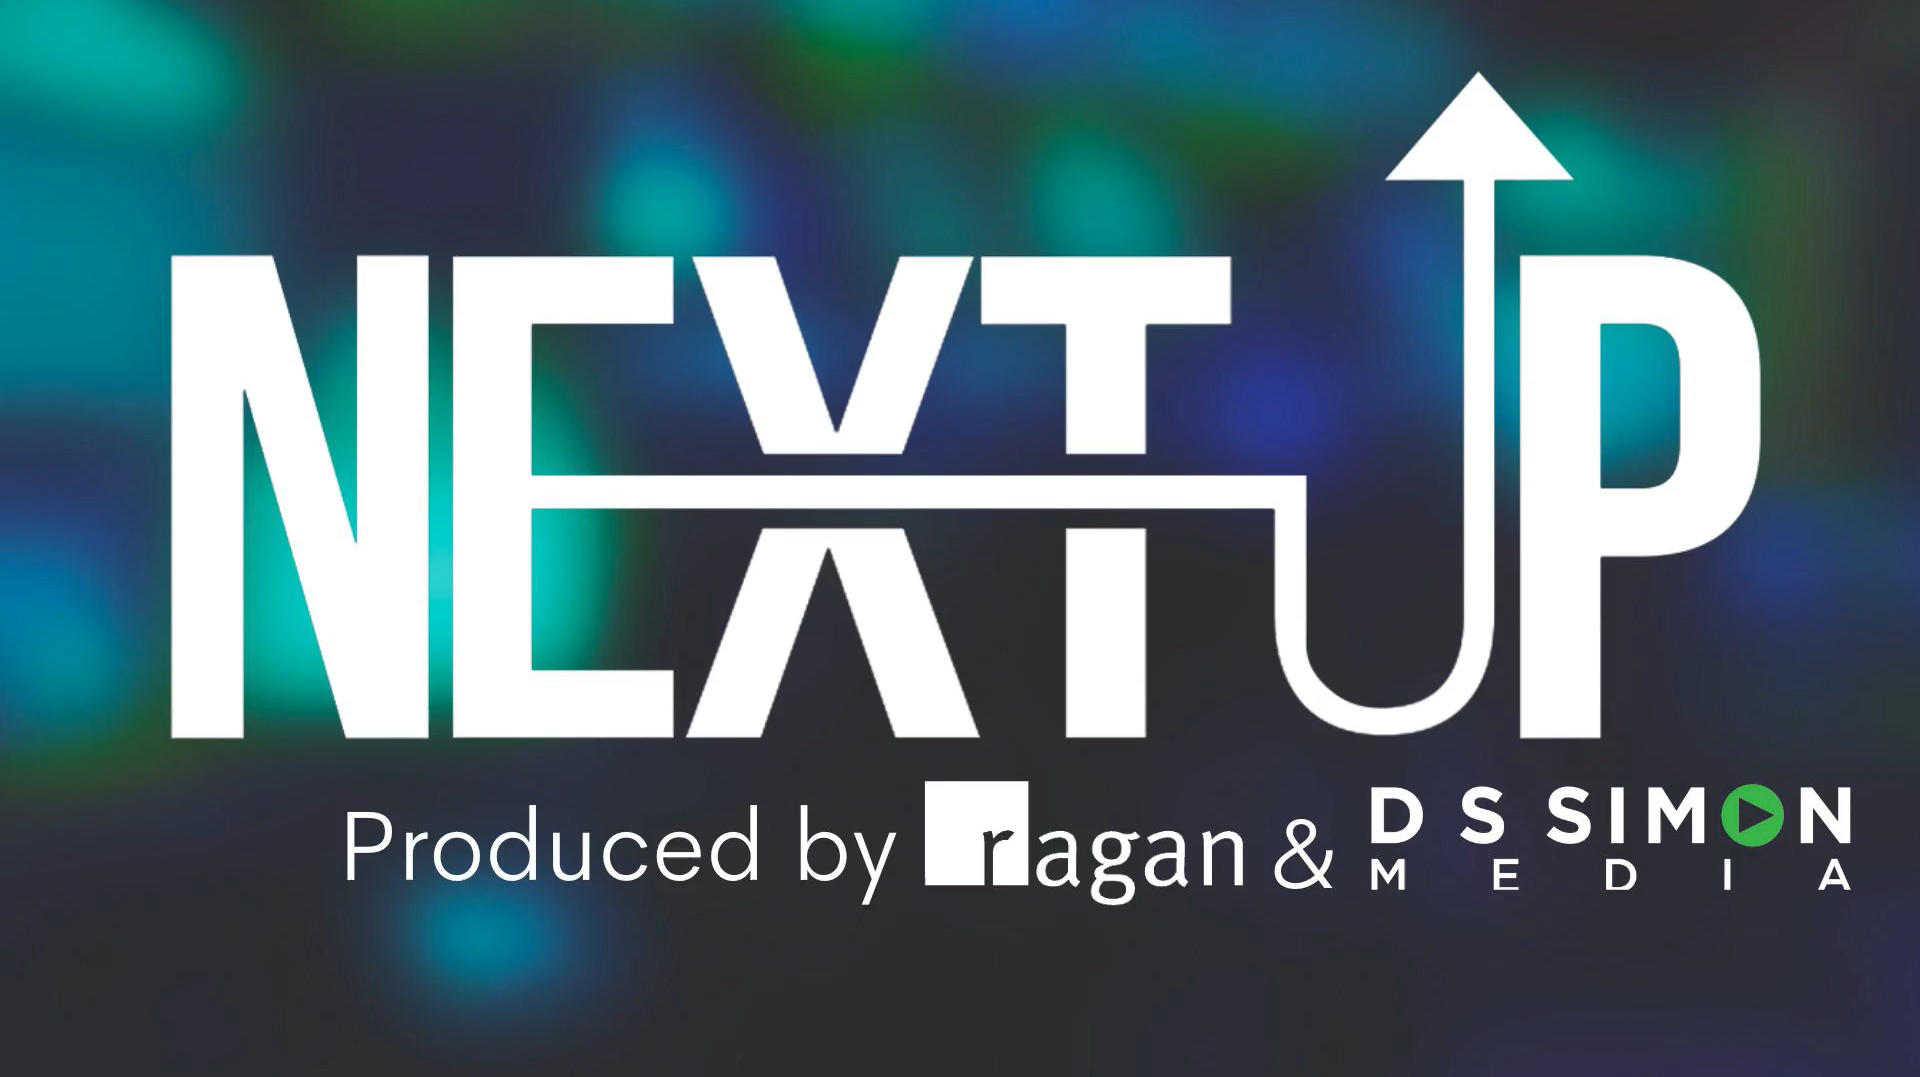 Announcing NextUp, a new video series from Ragan